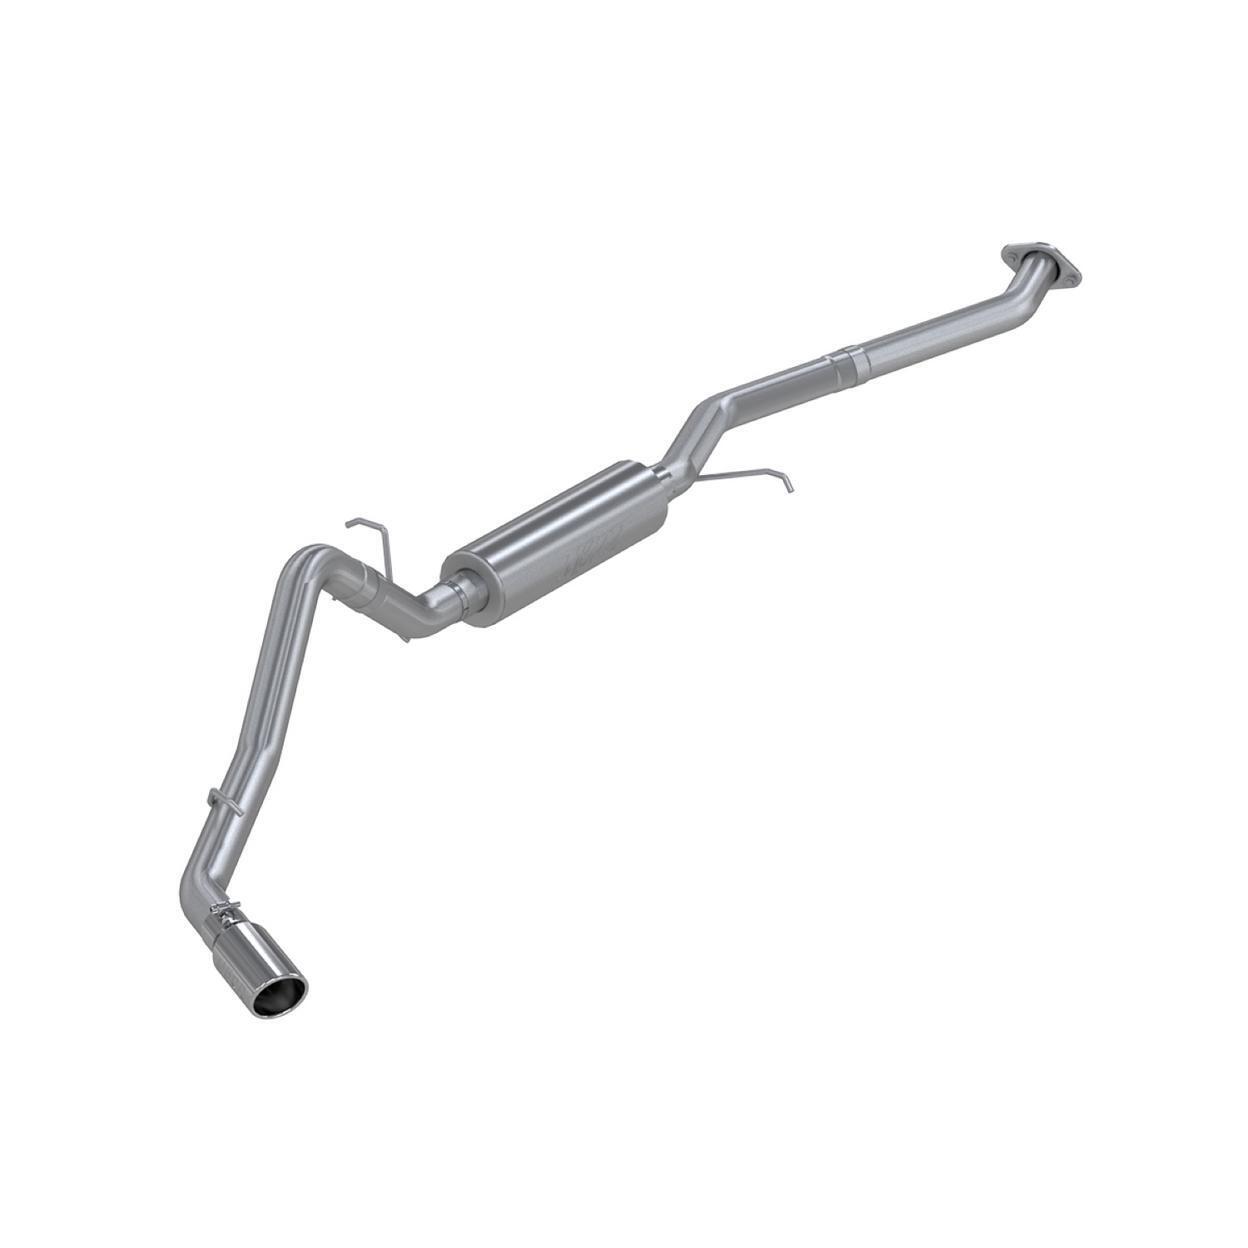 MBRP Exhaust S5014409-KZ Exhaust System Kit for 2007 Chevrolet Silverado 1500 Cl